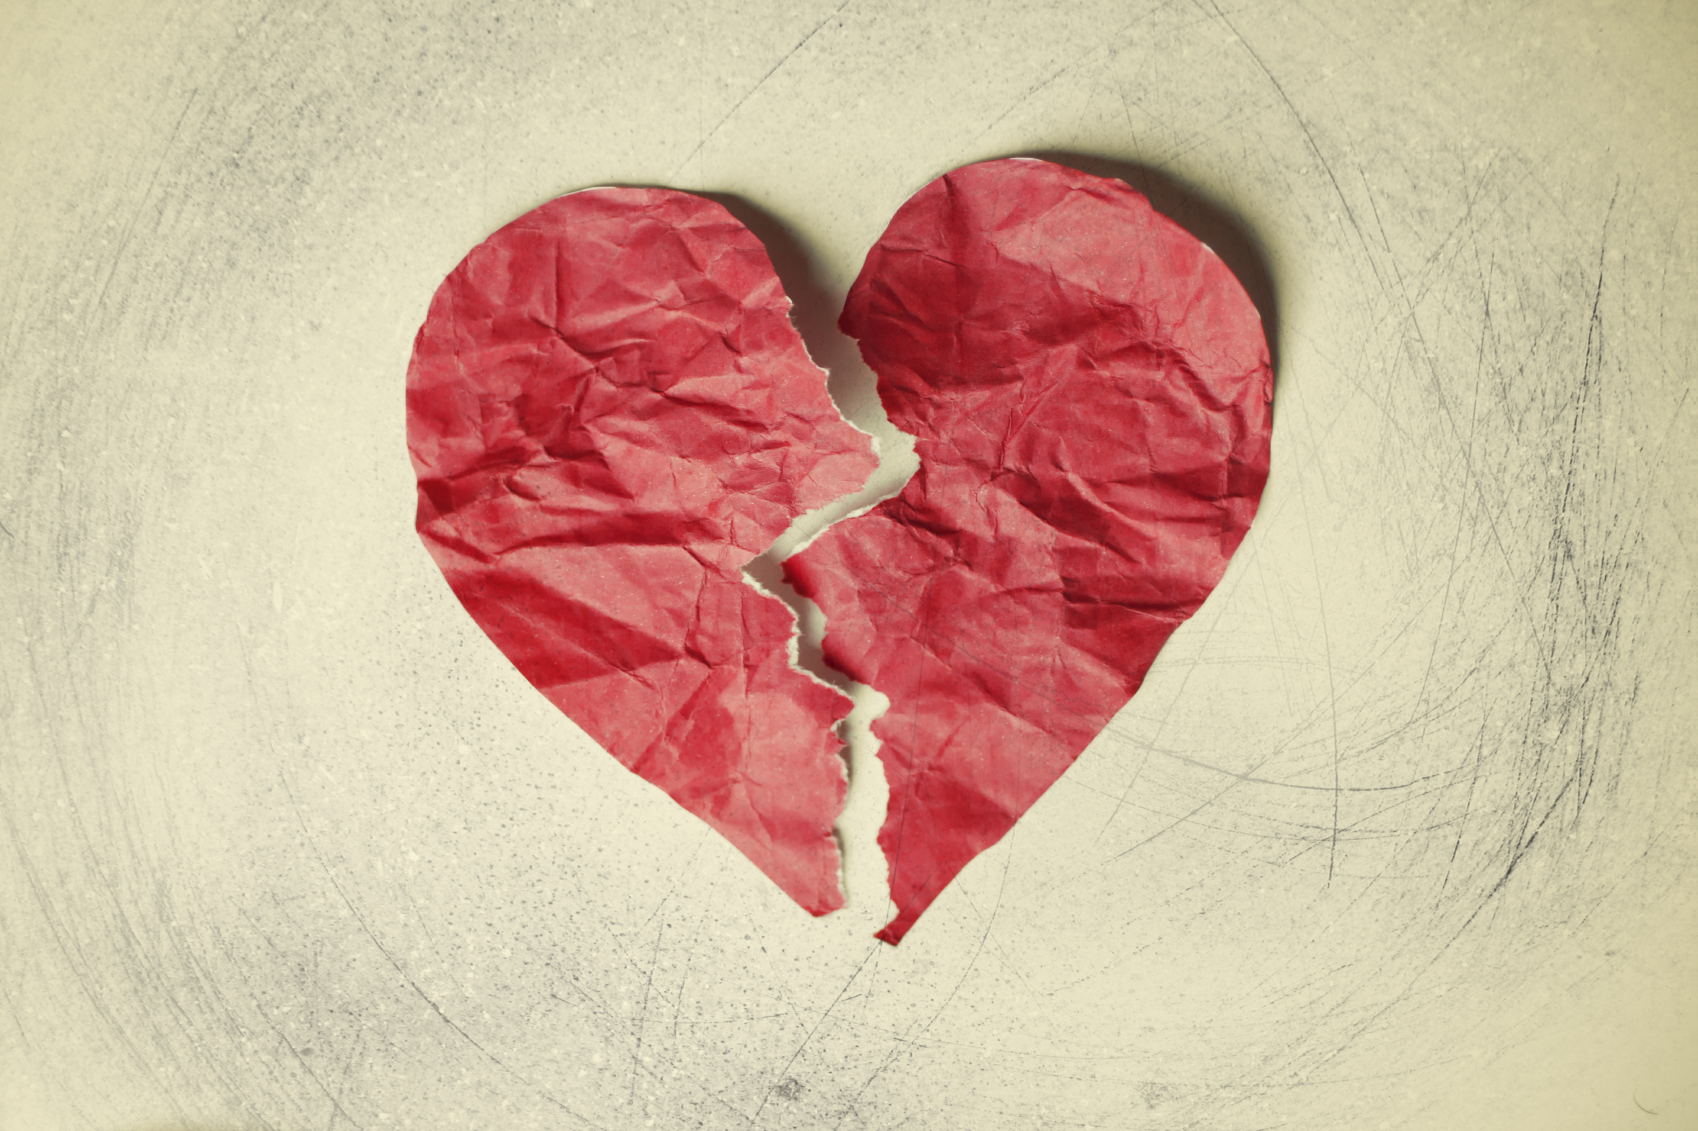 How To Handle A Broken Heart As You Wait For Love